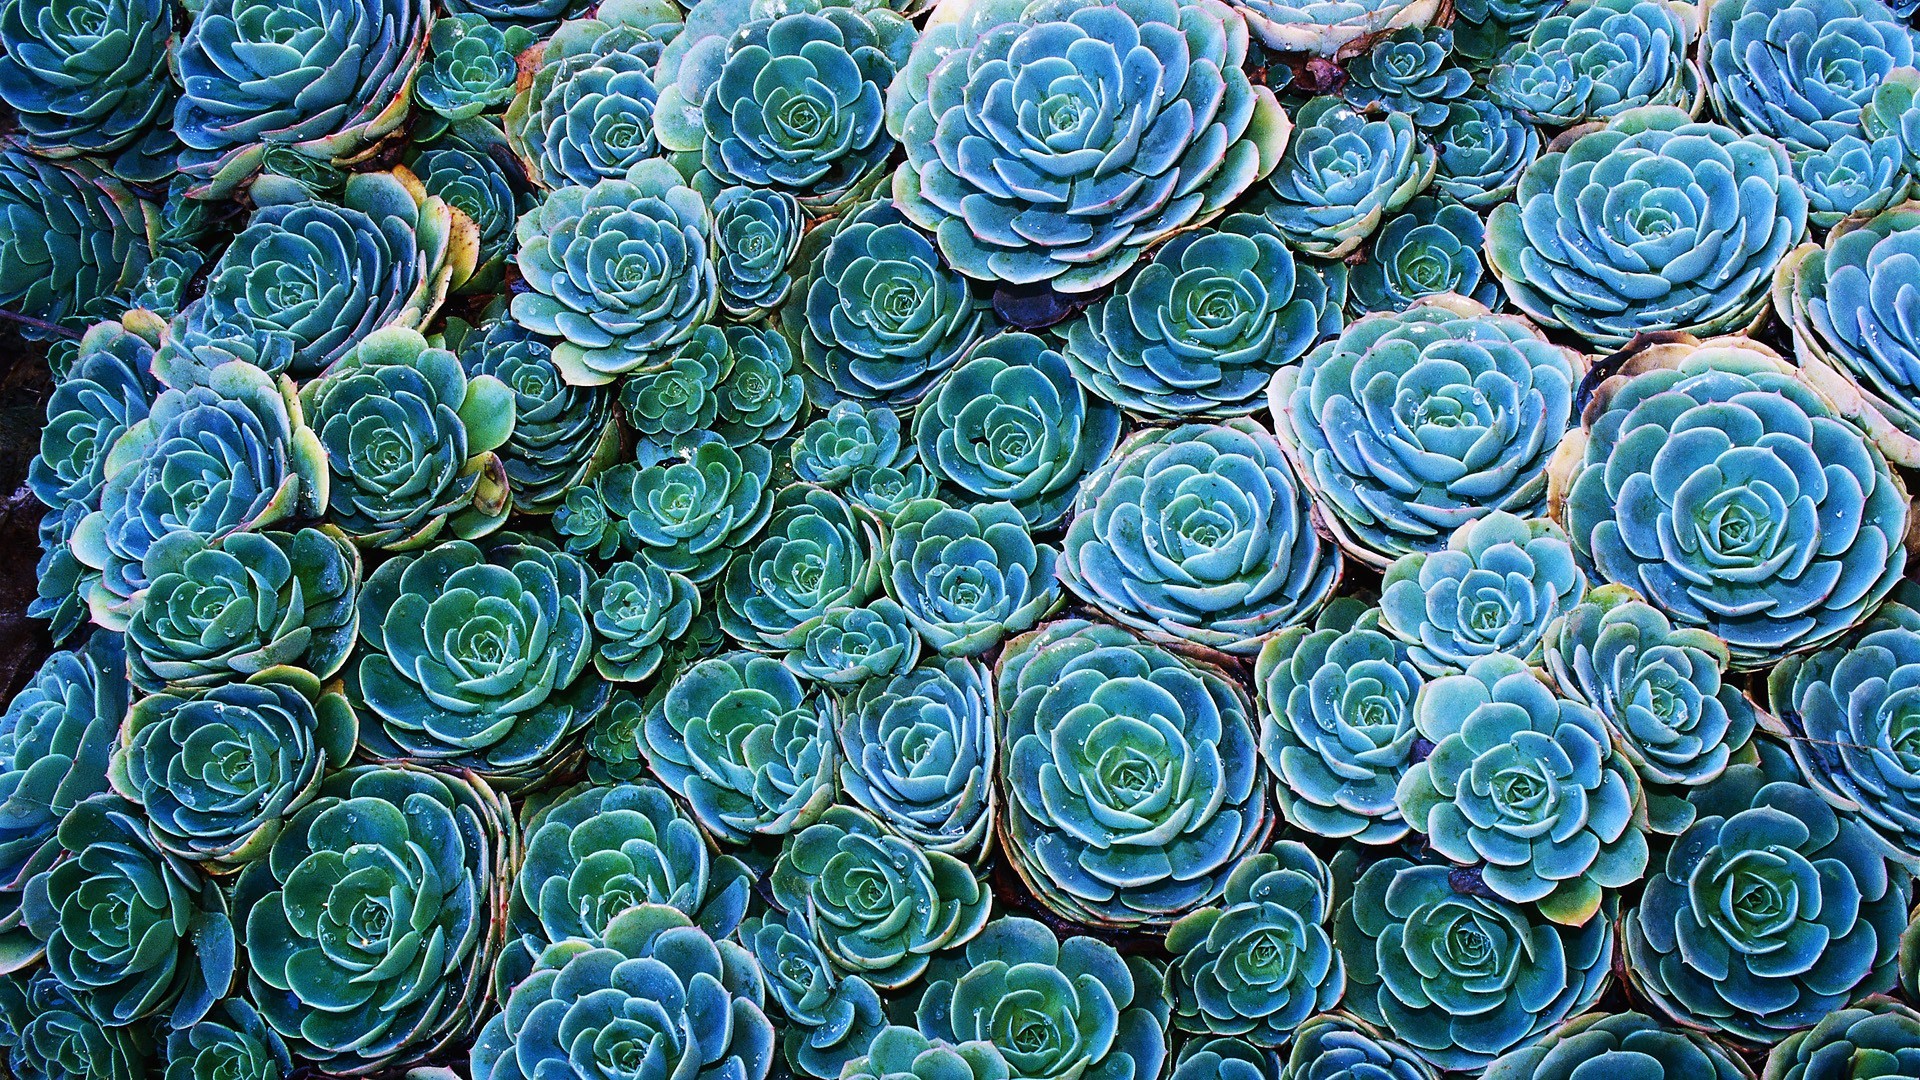 General 1920x1080 succulent nature plants flowers cyan blue turquoise macro green